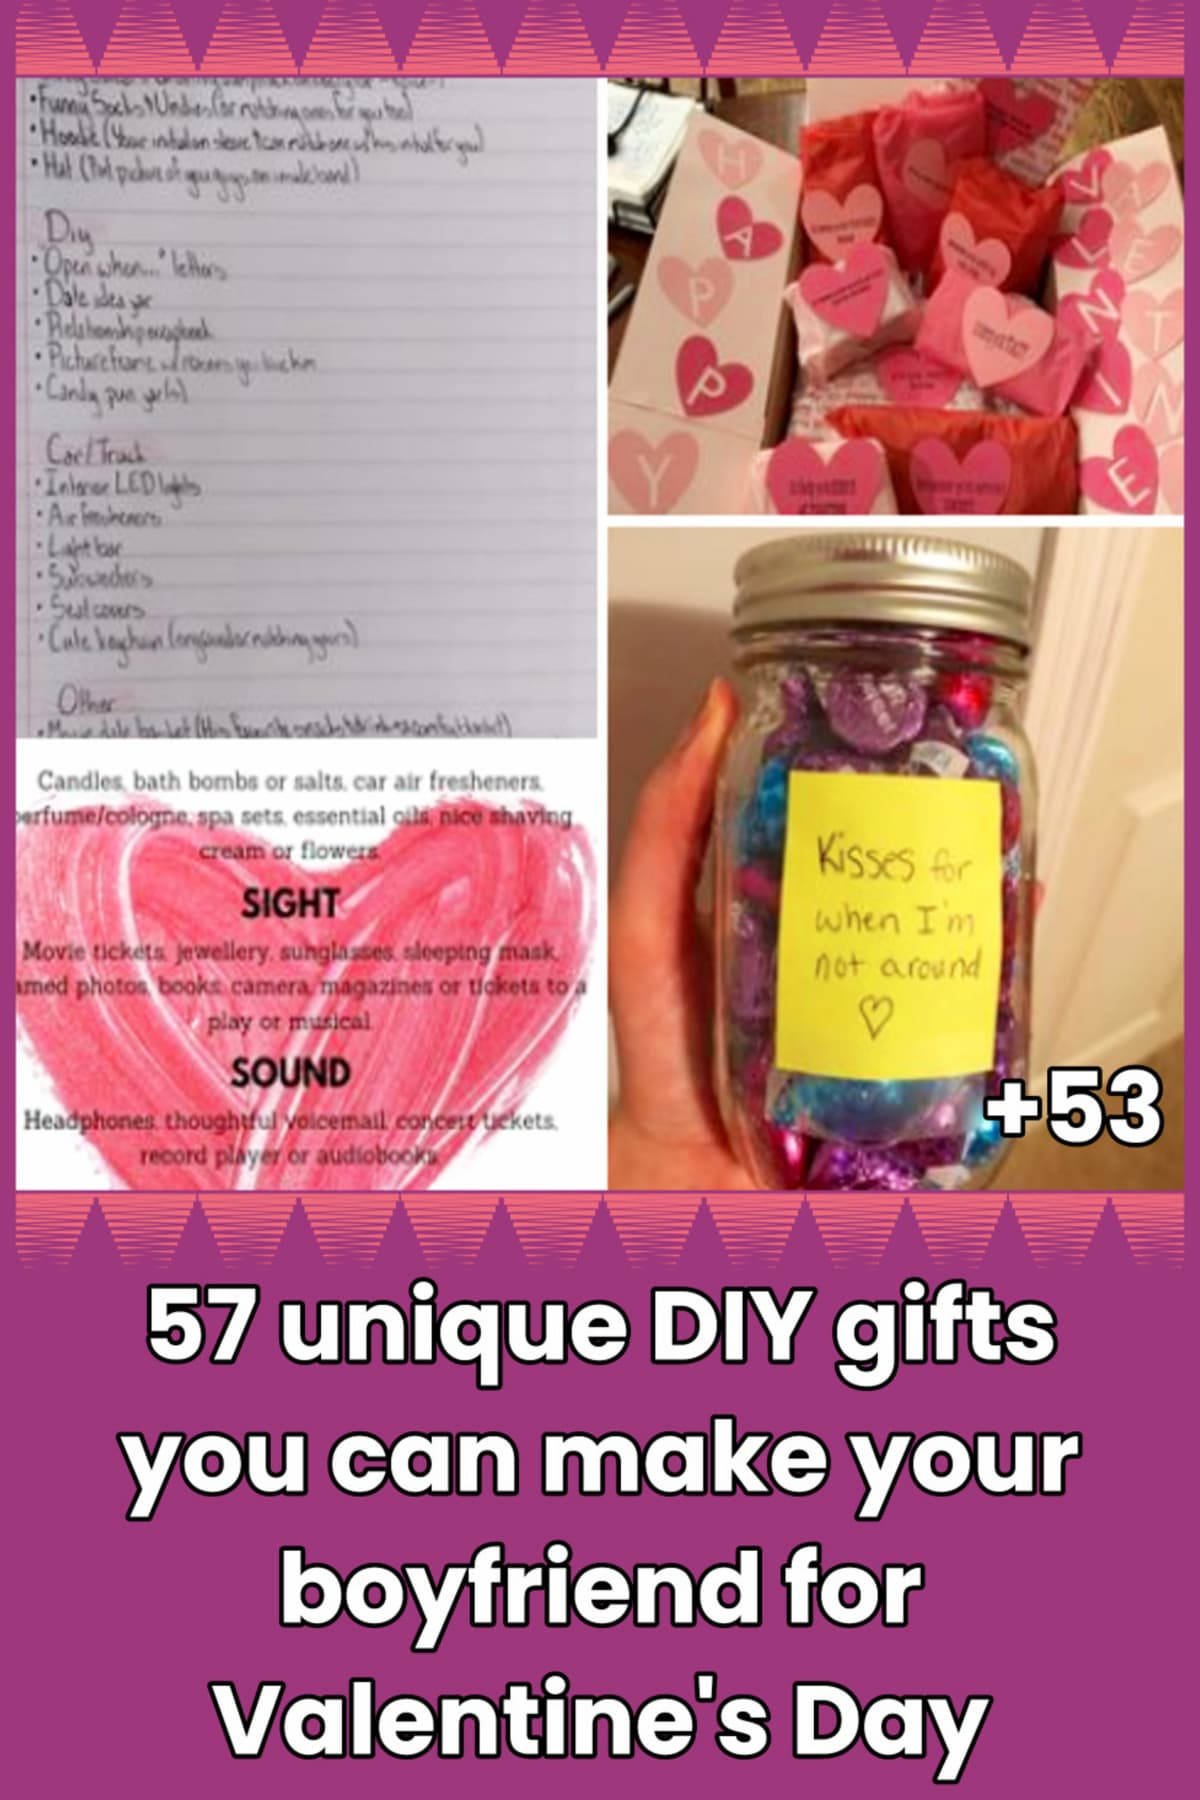 DIY gifts for boyfriend unique Valentines Day gift ideas - baskets, romantic, DIY, gamer, aesthetic, senses, last minute, cheap, creative, cute bf gift ideas for him - spoiling him for Vday